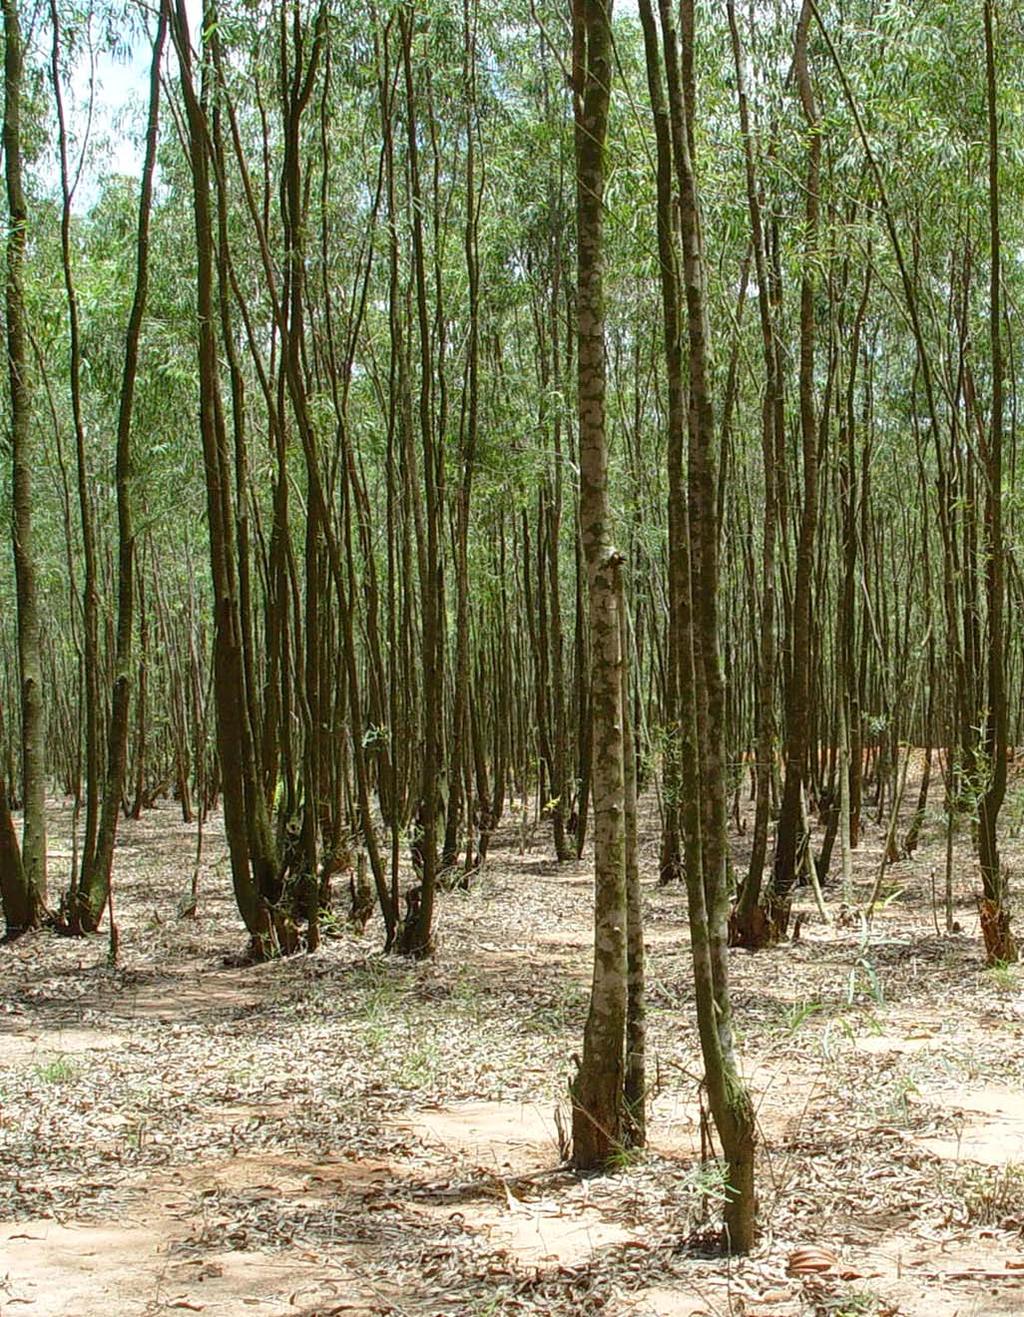 Most commonly, the earlier forest plantations yield between